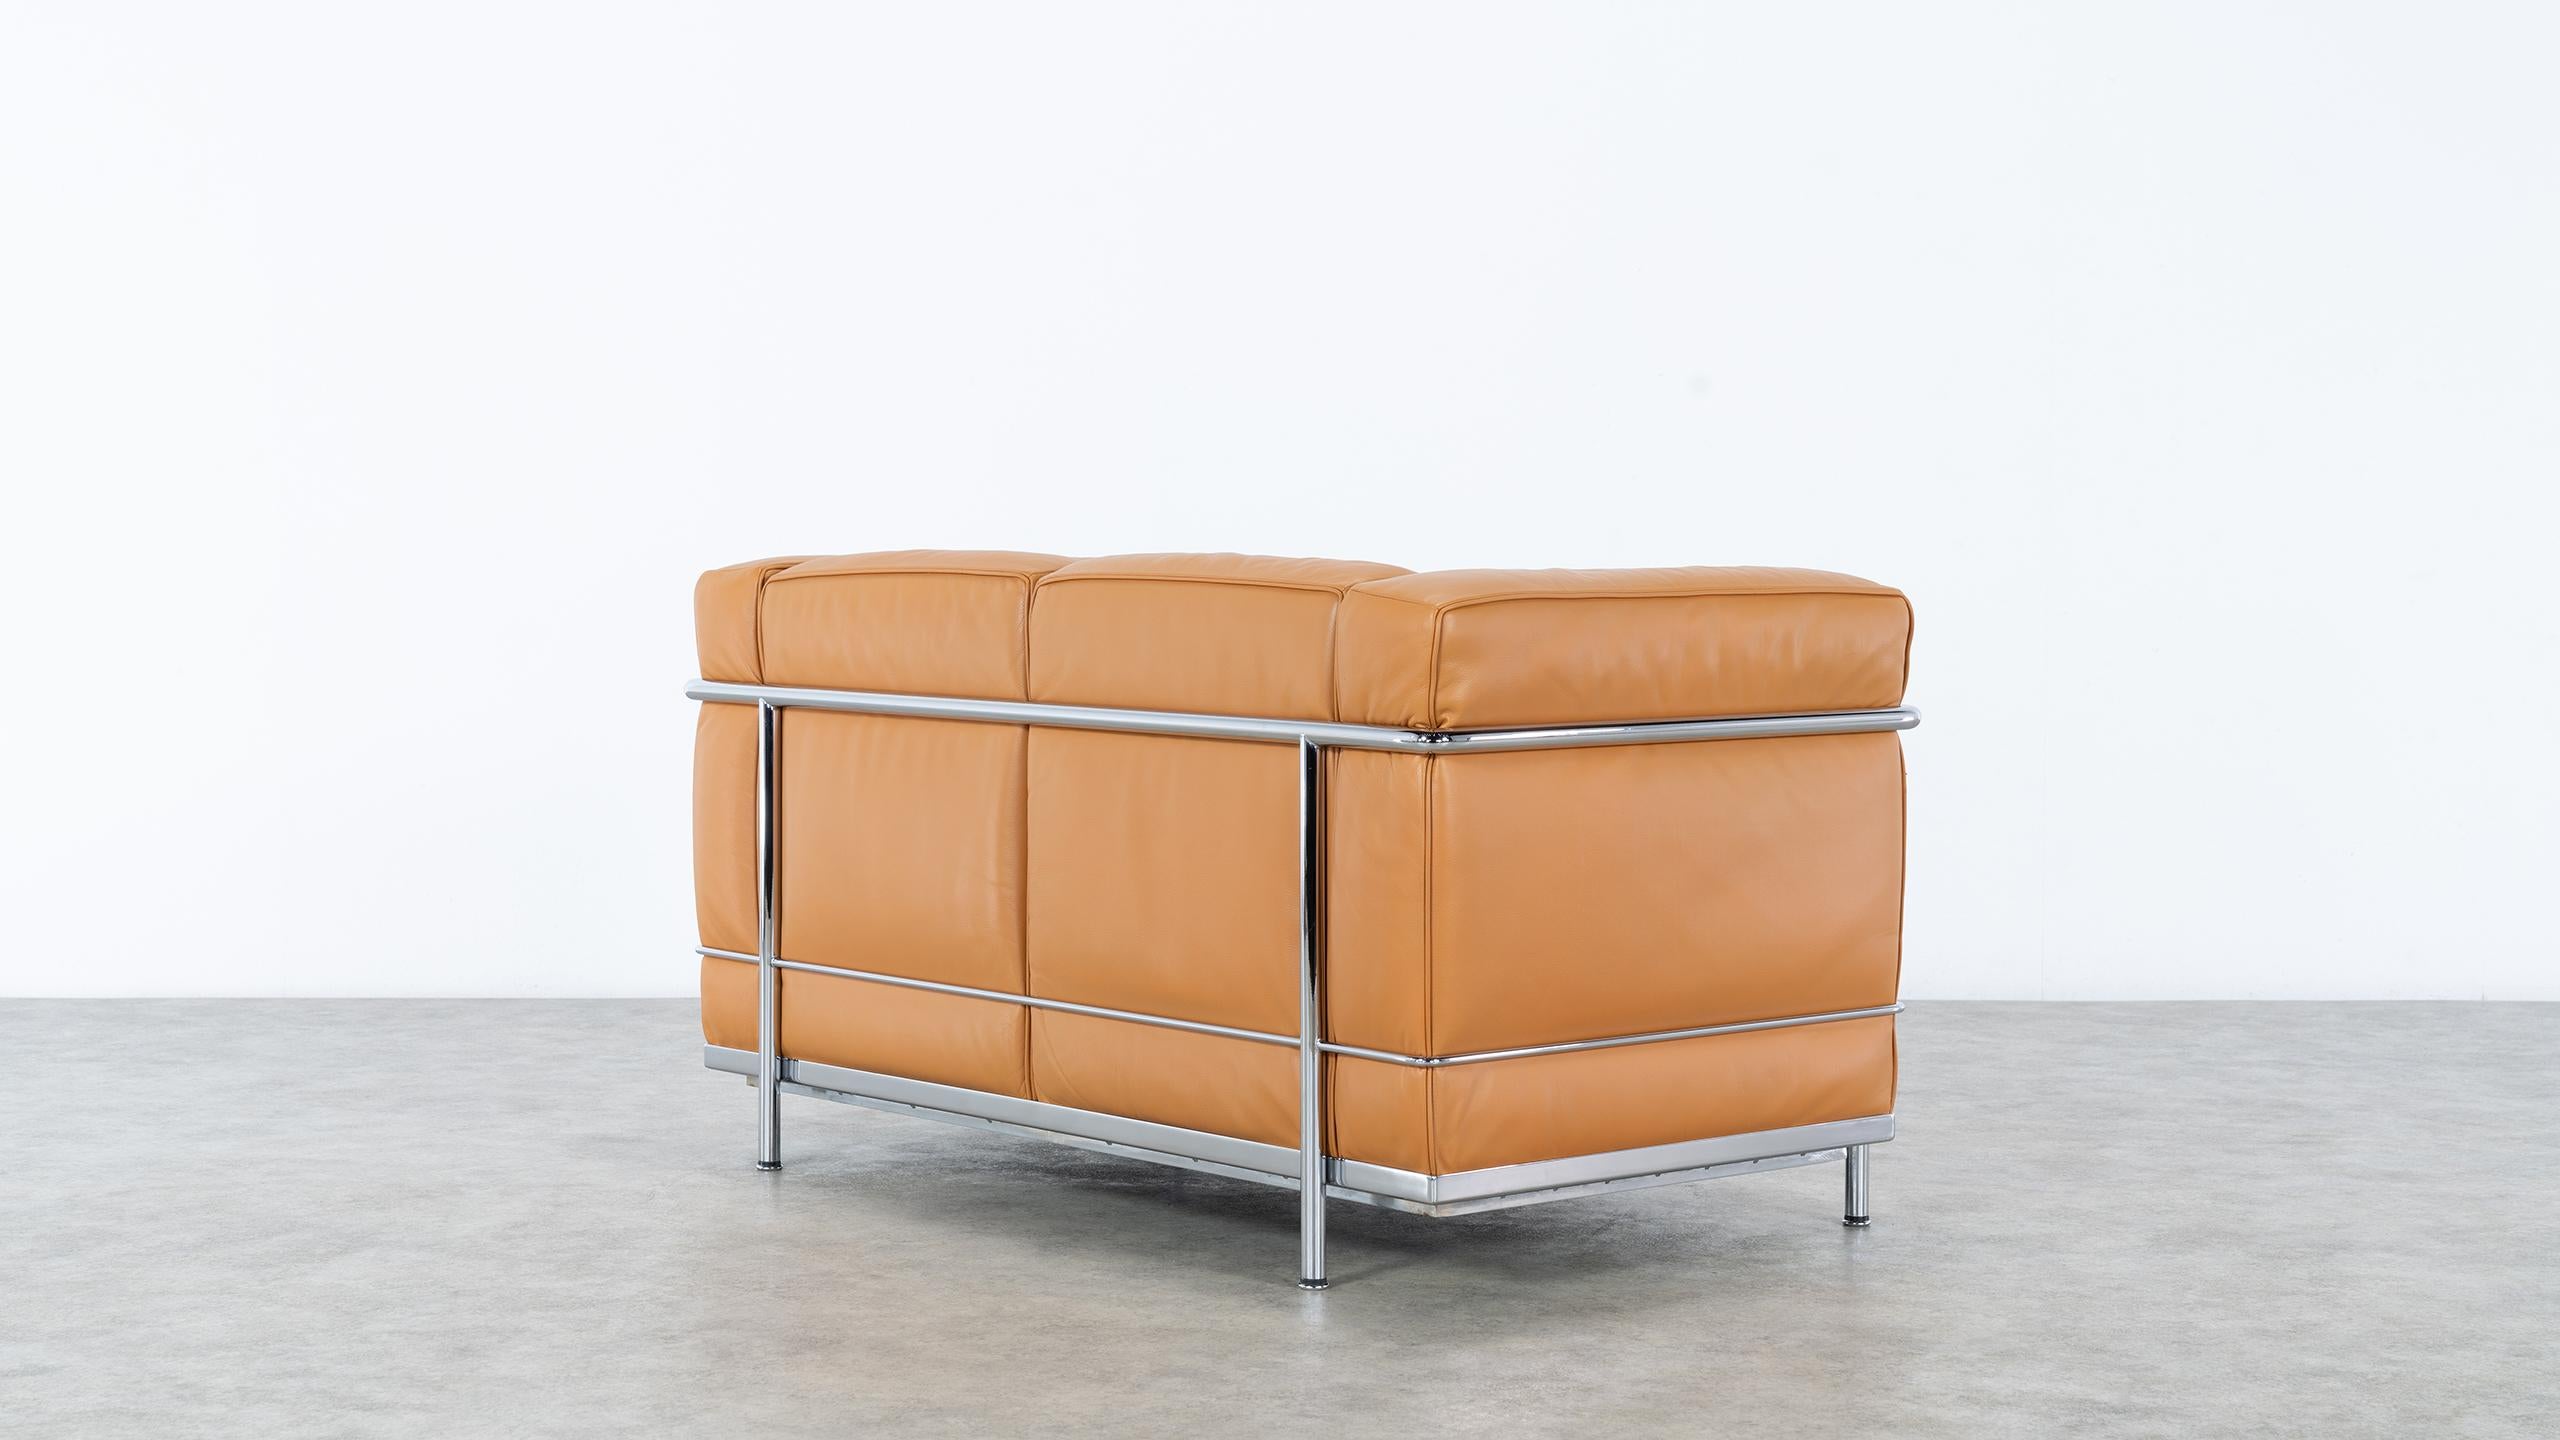 Bauhaus Le Corbusier Ch. Perriand LC2 Sofa Cassina in Cognac Leather, Signed & Stamped